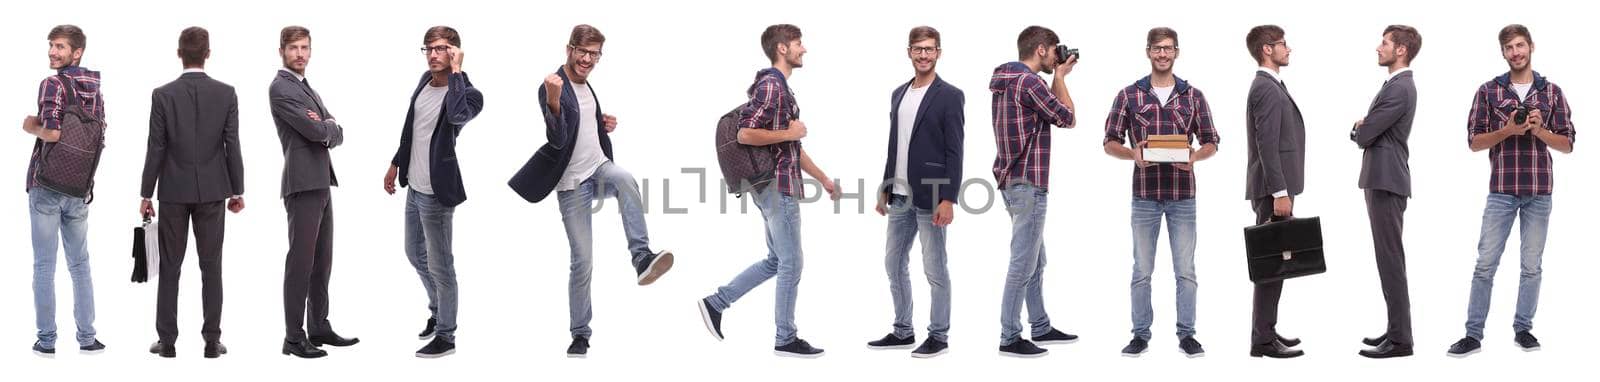 panoramic collage of a promising young man .isolated on white background